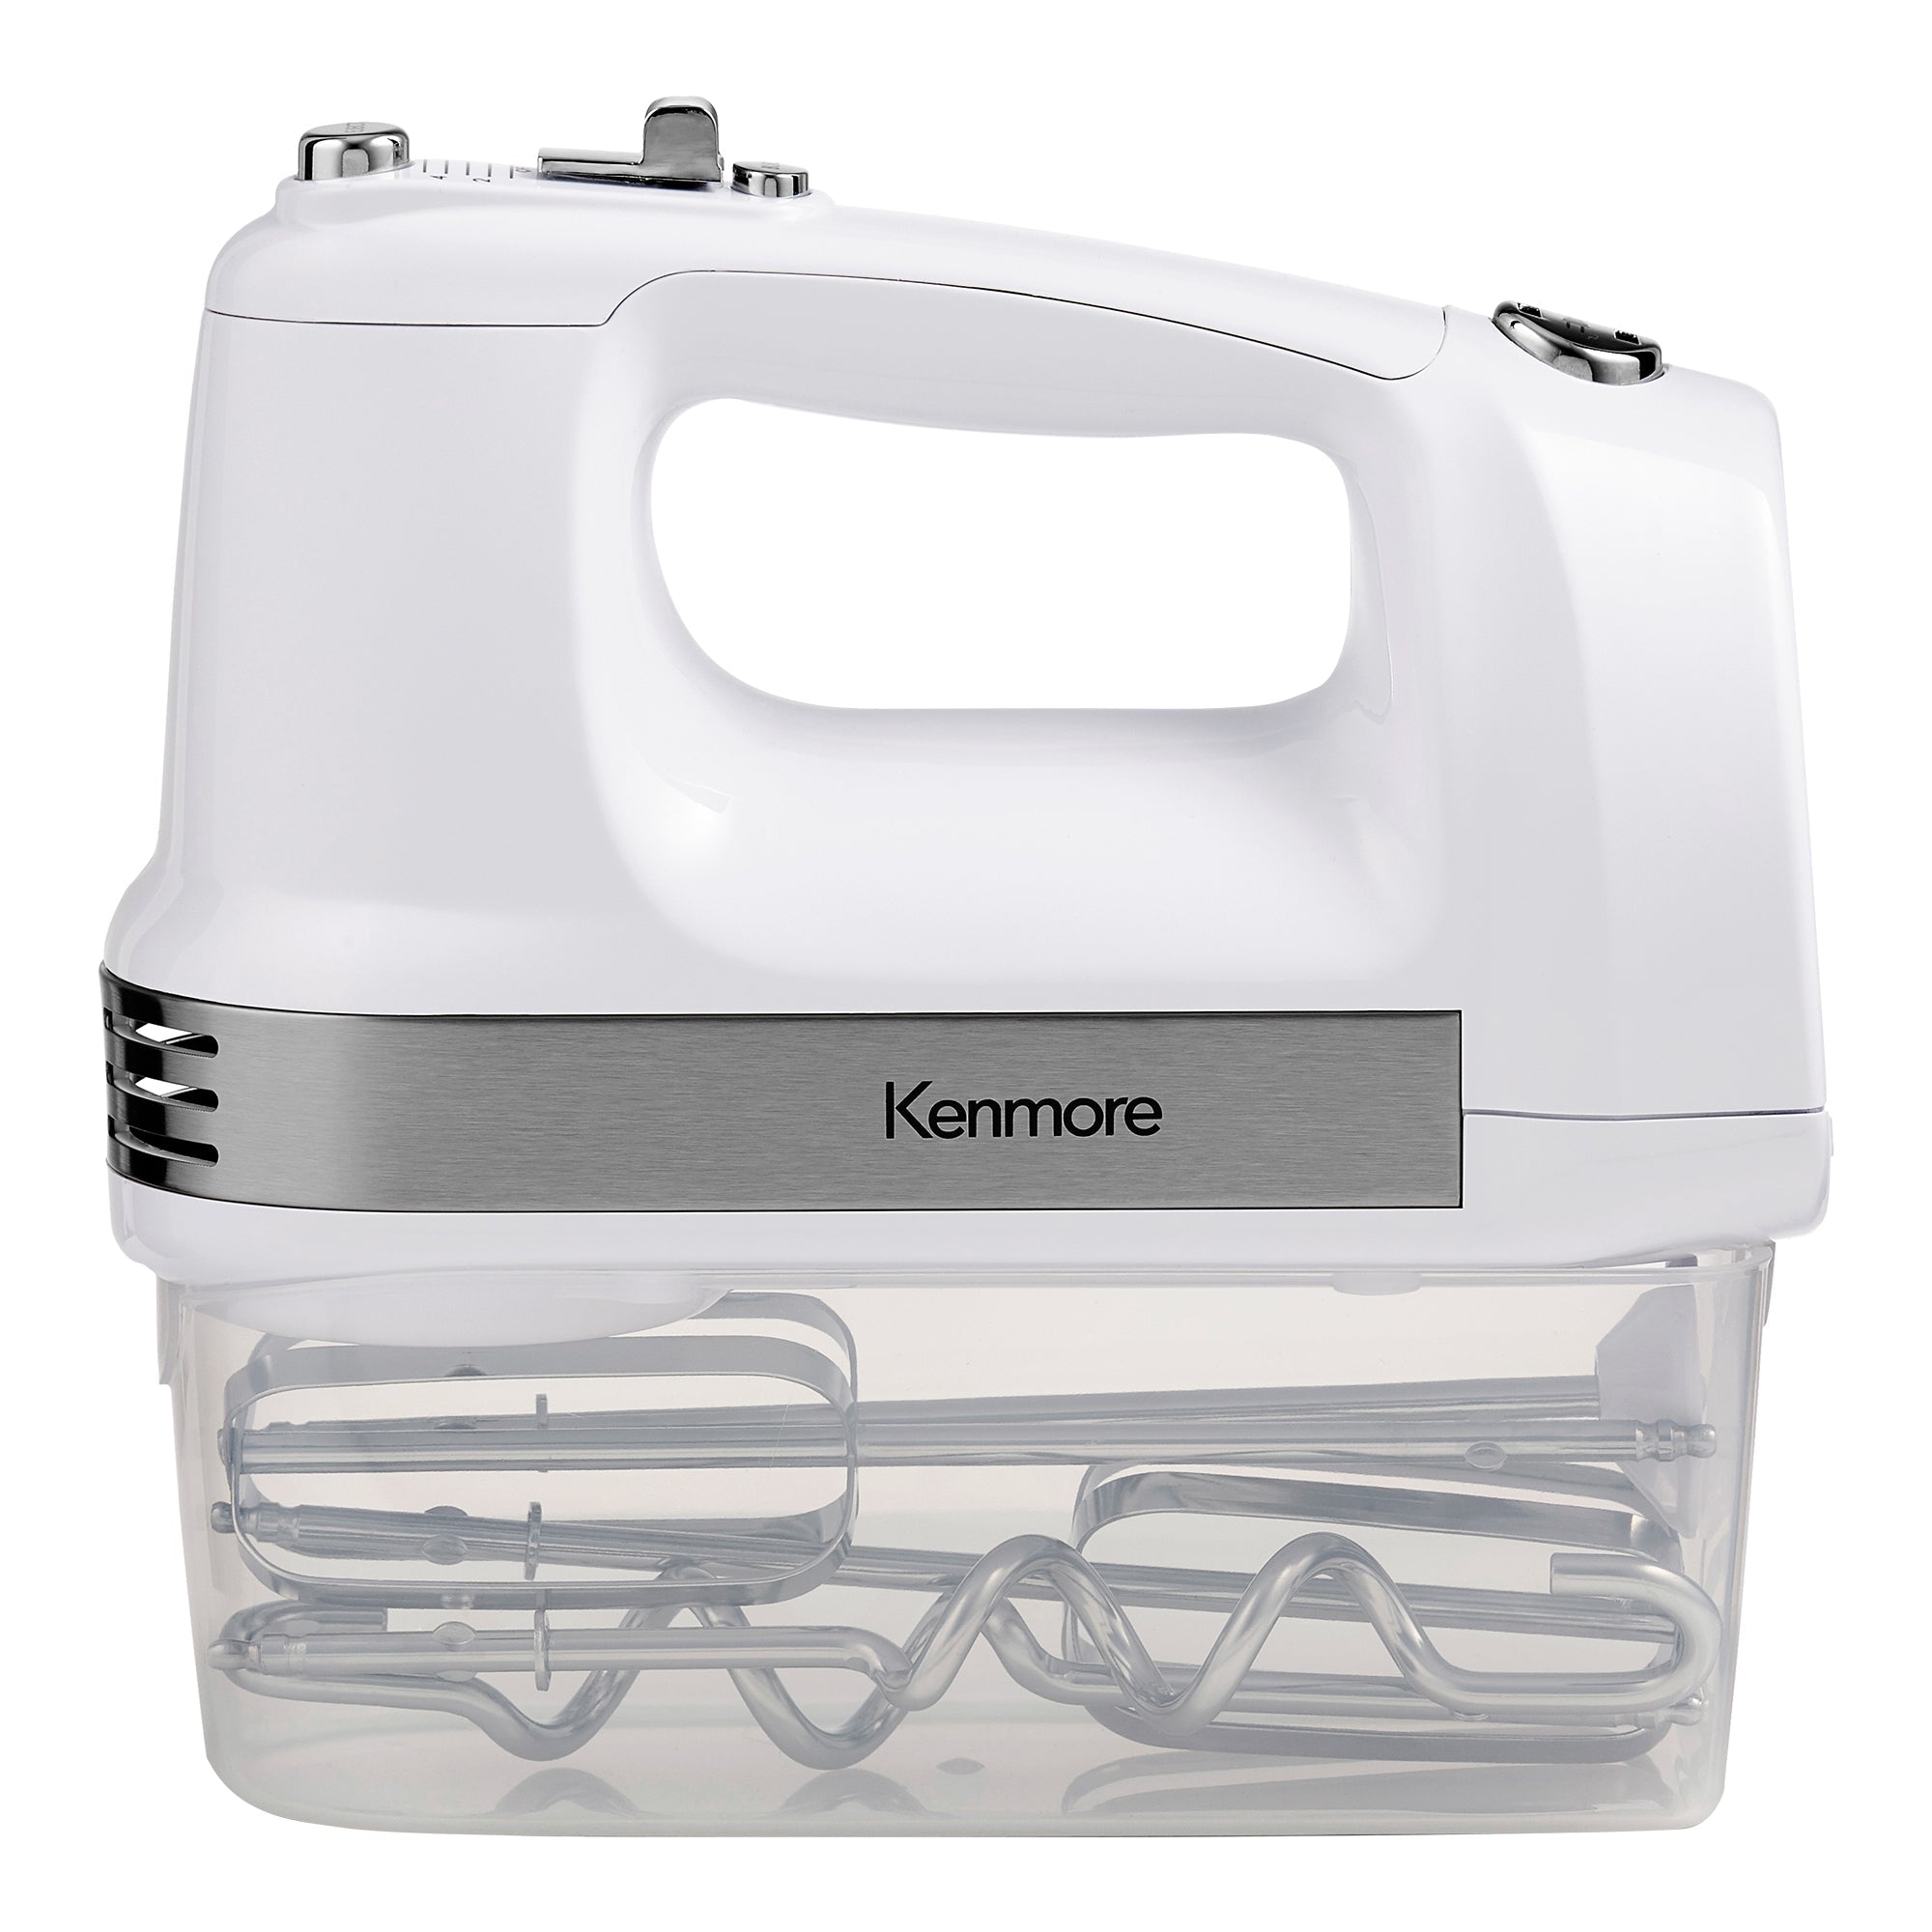 Product shot of white hand mixer with storage base attached and accessories inside